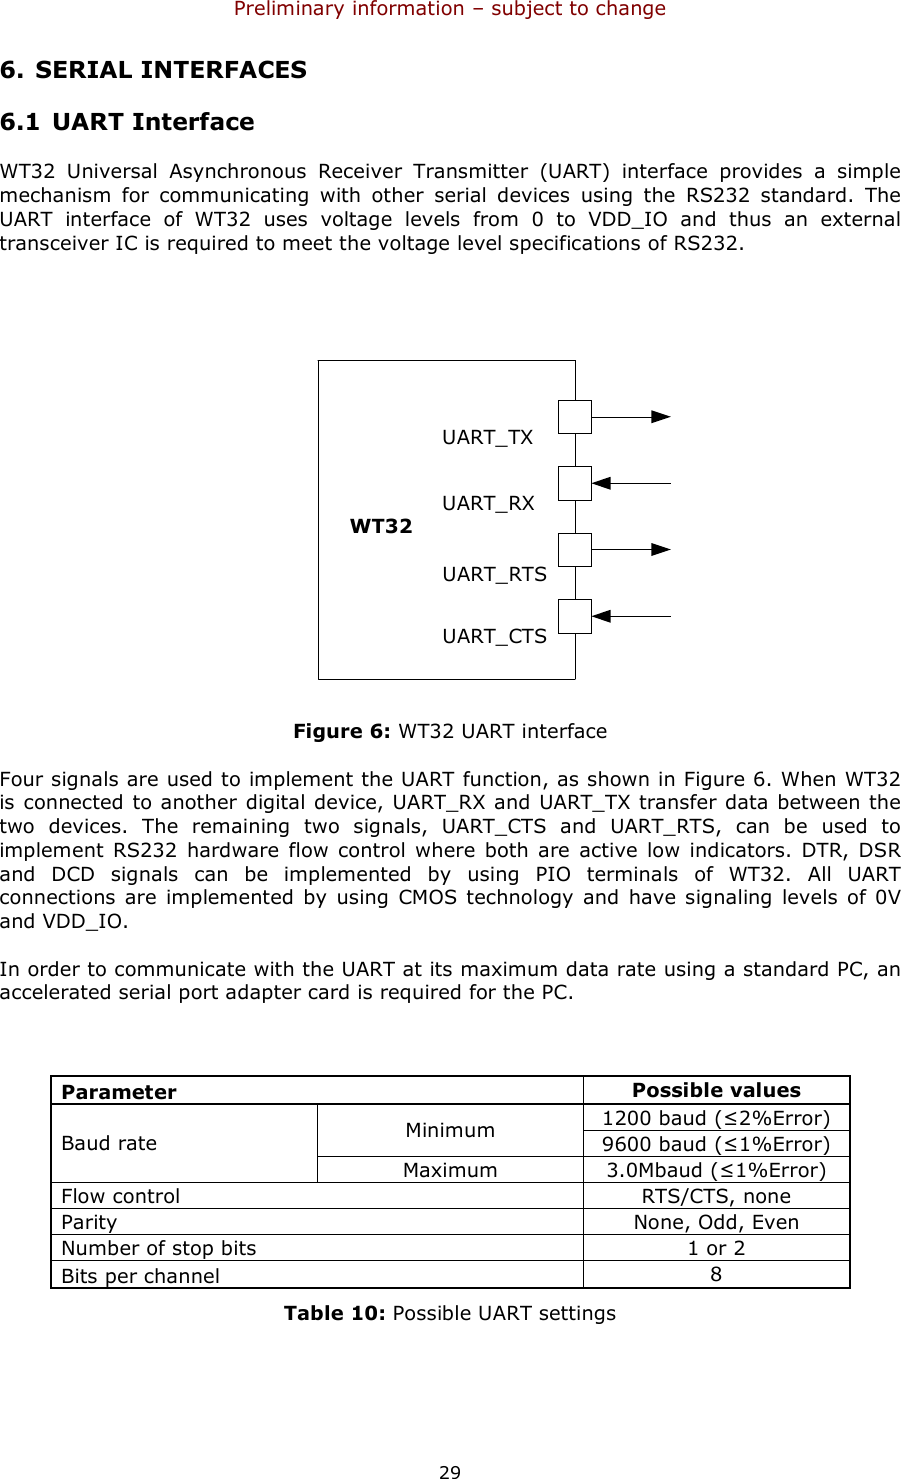 Preliminary information – subject to change  29 6. SERIAL INTERFACES 6.1 UART Interface WT32  Universal  Asynchronous  Receiver  Transmitter  (UART)  interface  provides  a  simple mechanism  for  communicating  with  other  serial  devices  using  the  RS232  standard.  The UART  interface  of  WT32  uses  voltage  levels  from  0  to  VDD_IO  and  thus  an  external transceiver IC is required to meet the voltage level specifications of RS232.    Figure 6: WT32 UART interface Four signals are used to implement the UART function, as shown in Figure 6. When WT32 is connected to another digital device, UART_RX and UART_TX transfer data between the two  devices.  The  remaining  two  signals,  UART_CTS  and  UART_RTS,  can  be  used  to implement  RS232  hardware flow  control where both  are active  low indicators. DTR,  DSR and  DCD  signals  can  be  implemented  by  using  PIO  terminals  of  WT32.  All  UART connections are  implemented  by using  CMOS  technology  and have signaling  levels  of 0V and VDD_IO. In order to communicate with the UART at its maximum data rate using a standard PC, an accelerated serial port adapter card is required for the PC.  Parameter  Possible values 1200 baud (≤2%Error) Minimum  9600 baud (≤1%Error) Baud rate Maximum  3.0Mbaud (≤1%Error) Flow control  RTS/CTS, none Parity  None, Odd, Even Number of stop bits  1 or 2 Bits per channel  8 Table 10: Possible UART settings  UART_TX UART_RX UART_RTS UART_CTS  WT32 